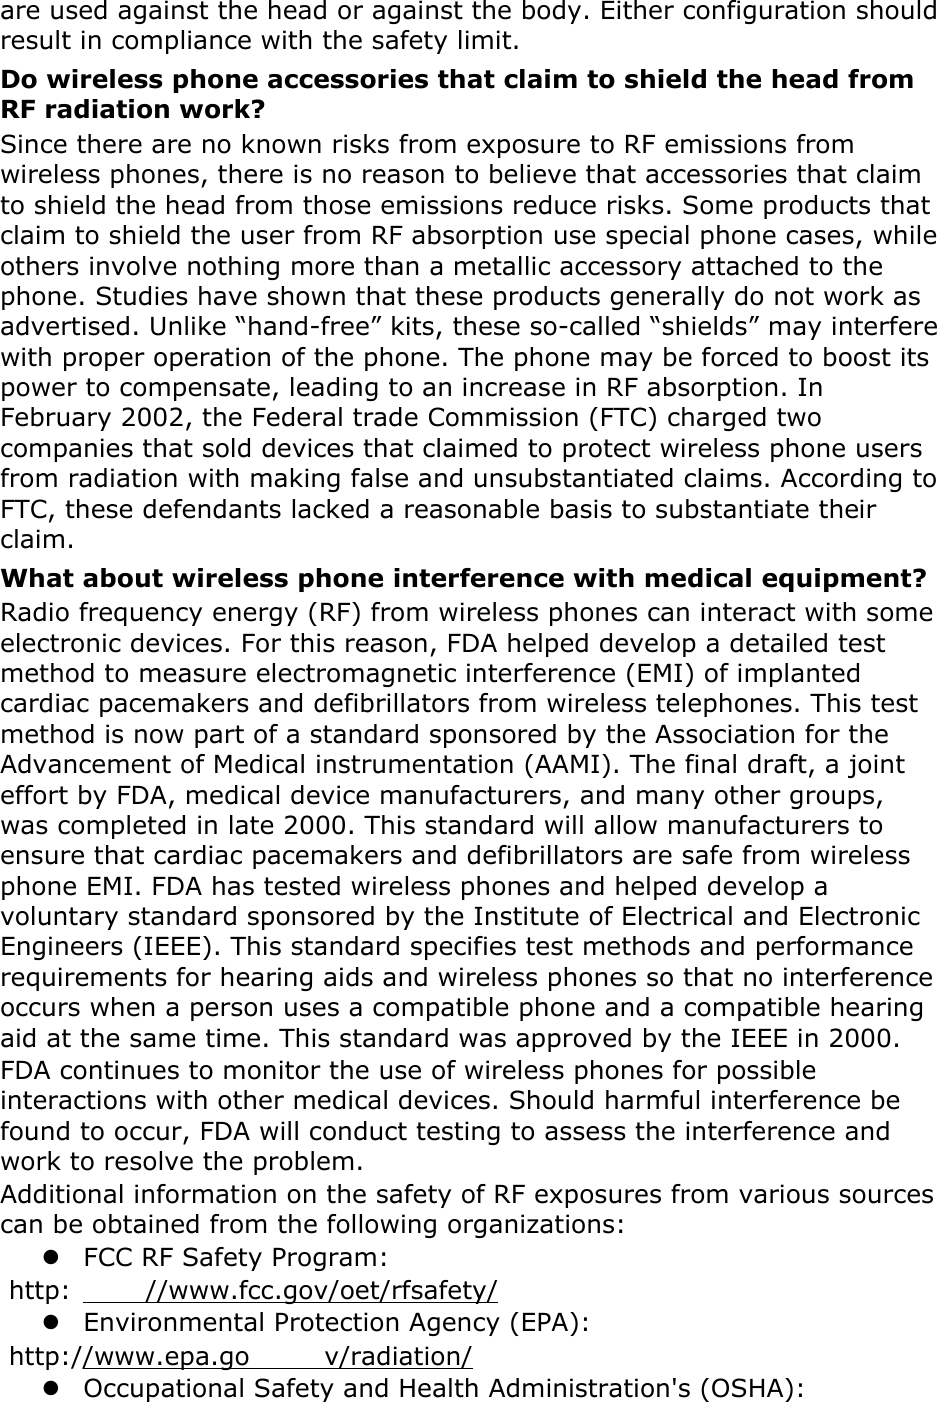 are used against the head or against the body. Either configuration should result in compliance with the safety limit. Do wireless phone accessories that claim to shield the head from RF radiation work? Since there are no known risks from exposure to RF emissions from wireless phones, there is no reason to believe that accessories that claim to shield the head from those emissions reduce risks. Some products that claim to shield the user from RF absorption use special phone cases, while others involve nothing more than a metallic accessory attached to the phone. Studies have shown that these products generally do not work as advertised. Unlike “hand-free” kits, these so-called “shields” may interfere with proper operation of the phone. The phone may be forced to boost its power to compensate, leading to an increase in RF absorption. In February 2002, the Federal trade Commission (FTC) charged two companies that sold devices that claimed to protect wireless phone users from radiation with making false and unsubstantiated claims. According to FTC, these defendants lacked a reasonable basis to substantiate their claim. What about wireless phone interference with medical equipment? Radio frequency energy (RF) from wireless phones can interact with some electronic devices. For this reason, FDA helped develop a detailed test method to measure electromagnetic interference (EMI) of implanted cardiac pacemakers and defibrillators from wireless telephones. This test method is now part of a standard sponsored by the Association for the Advancement of Medical instrumentation (AAMI). The final draft, a joint effort by FDA, medical device manufacturers, and many other groups, was completed in late 2000. This standard will allow manufacturers to ensure that cardiac pacemakers and defibrillators are safe from wireless phone EMI. FDA has tested wireless phones and helped develop a voluntary standard sponsored by the Institute of Electrical and Electronic Engineers (IEEE). This standard specifies test methods and performance requirements for hearing aids and wireless phones so that no interference occurs when a person uses a compatible phone and a compatible hearing aid at the same time. This standard was approved by the IEEE in 2000. FDA continues to monitor the use of wireless phones for possible interactions with other medical devices. Should harmful interference be found to occur, FDA will conduct testing to assess the interference and work to resolve the problem. Additional information on the safety of RF exposures from various sources can be obtained from the following organizations:  FCC RF Safety Program:  http: //www.fcc.gov/oet/rfsafety/  Environmental Protection Agency (EPA):  http://www.epa.go v/radiation/  Occupational Safety and Health Administration&apos;s (OSHA):   